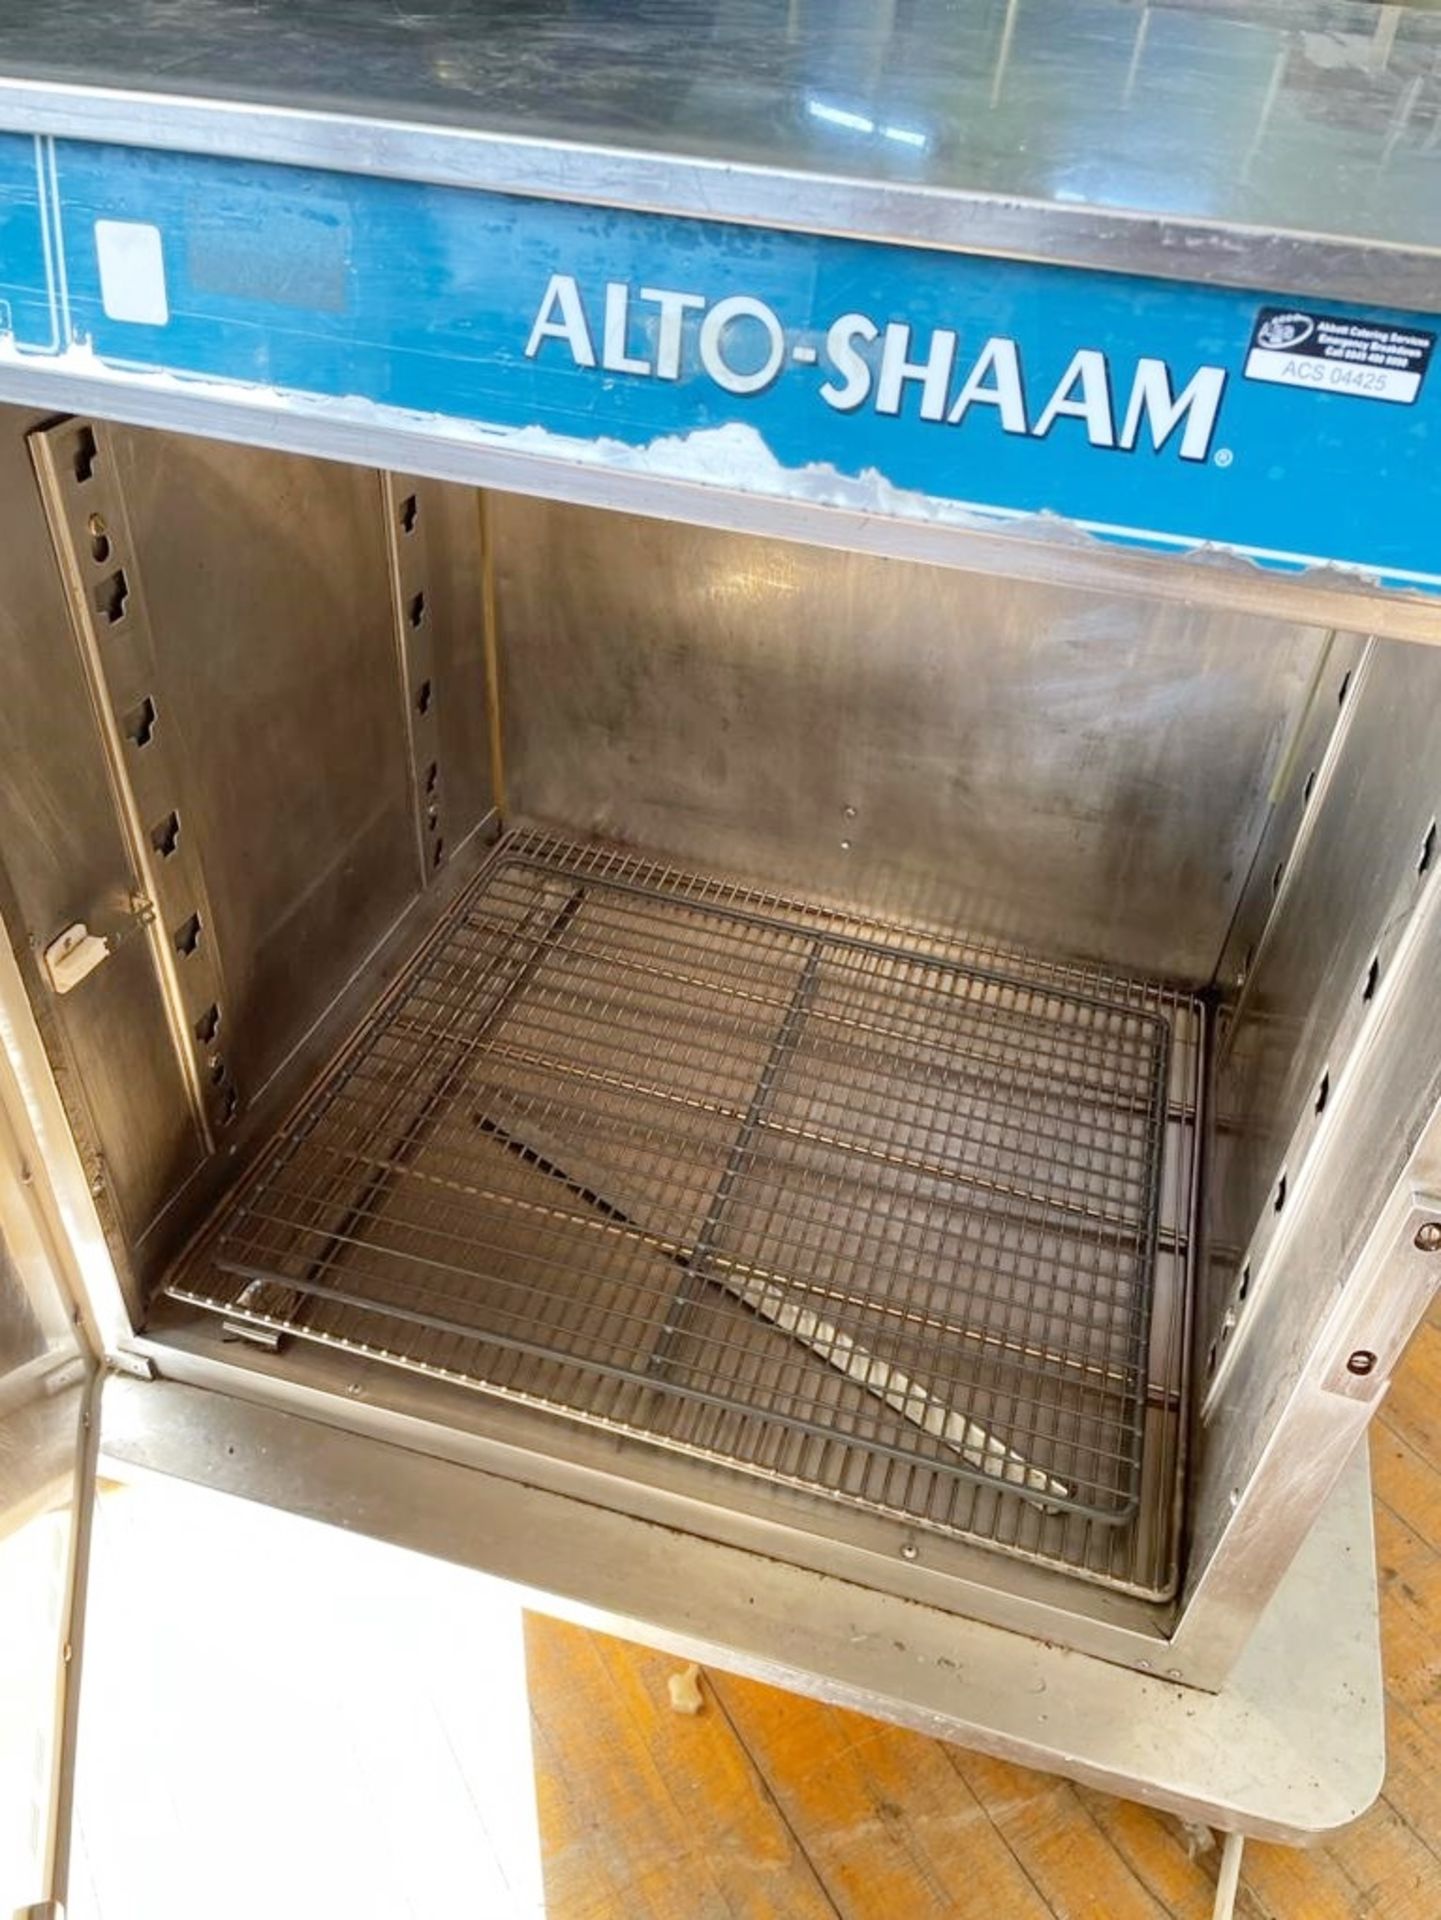 1 x Alto-Shaam Food Warming Holding Cabinet on Castors - Stainless Steel Exterior - CL667 - - Image 3 of 4